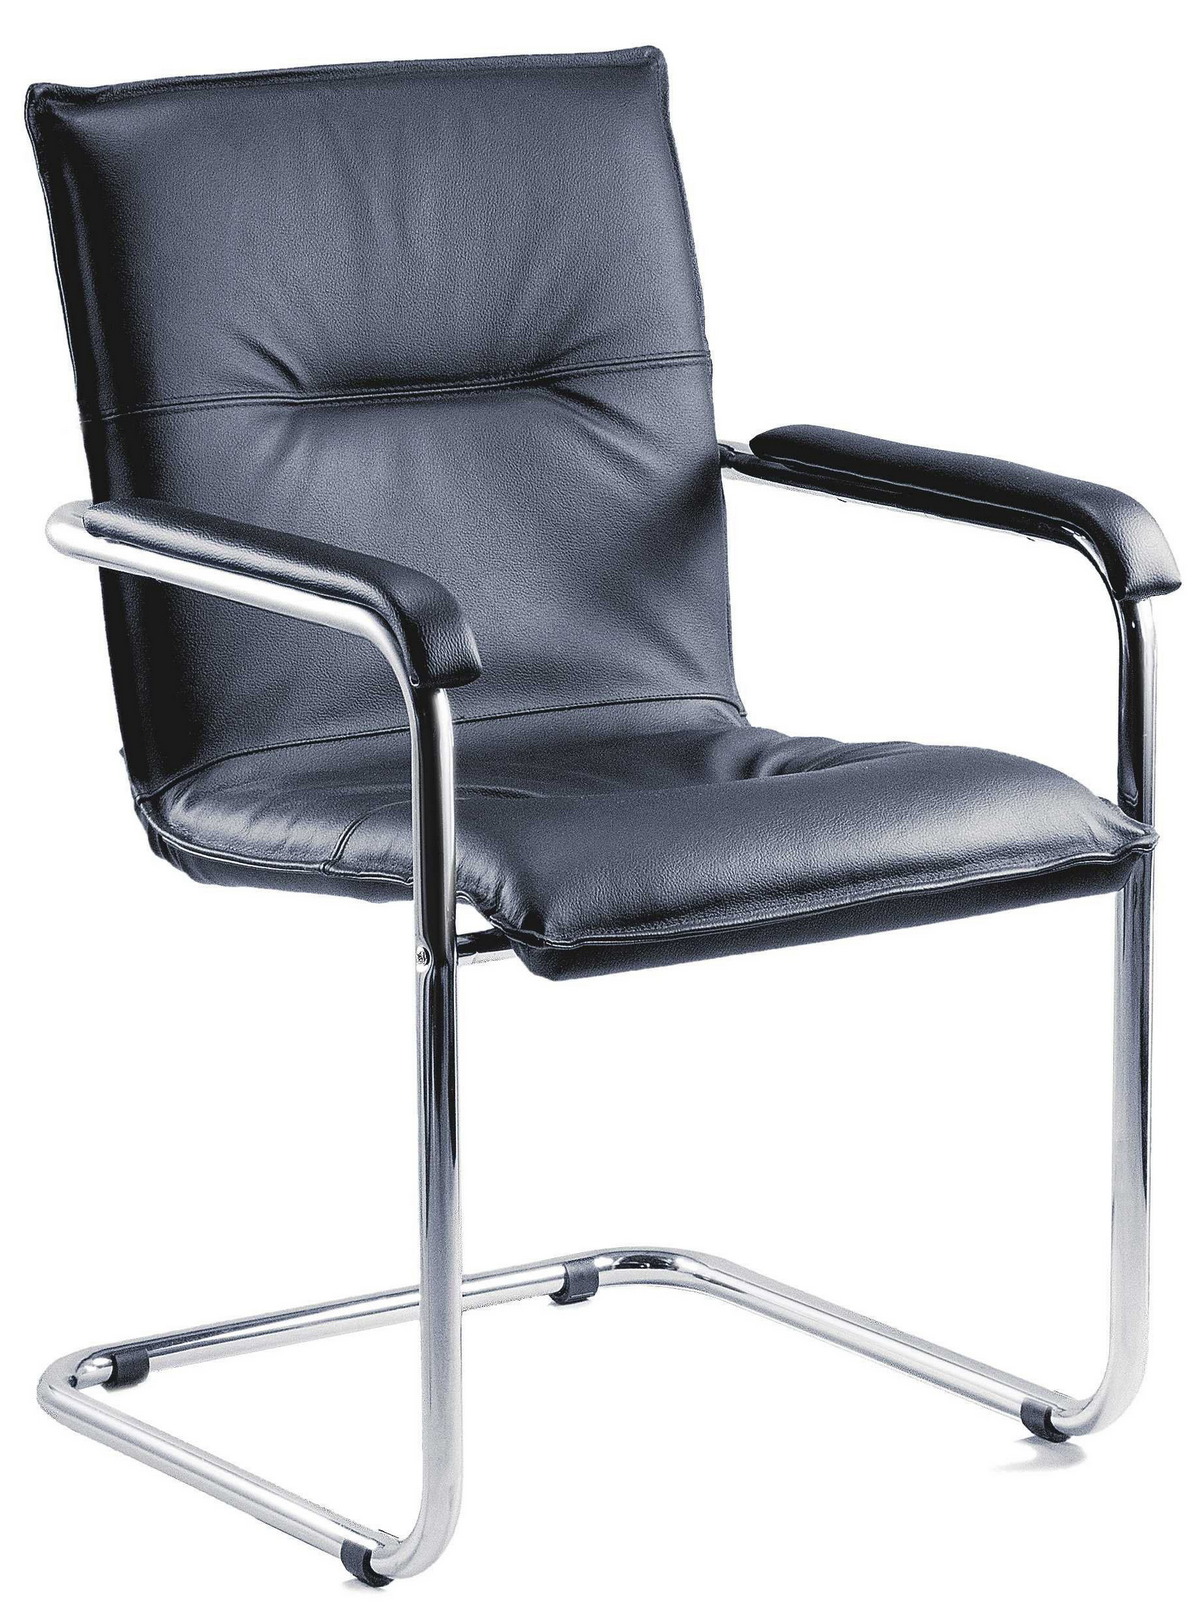 Her Leather Faced Visitor Office Chair